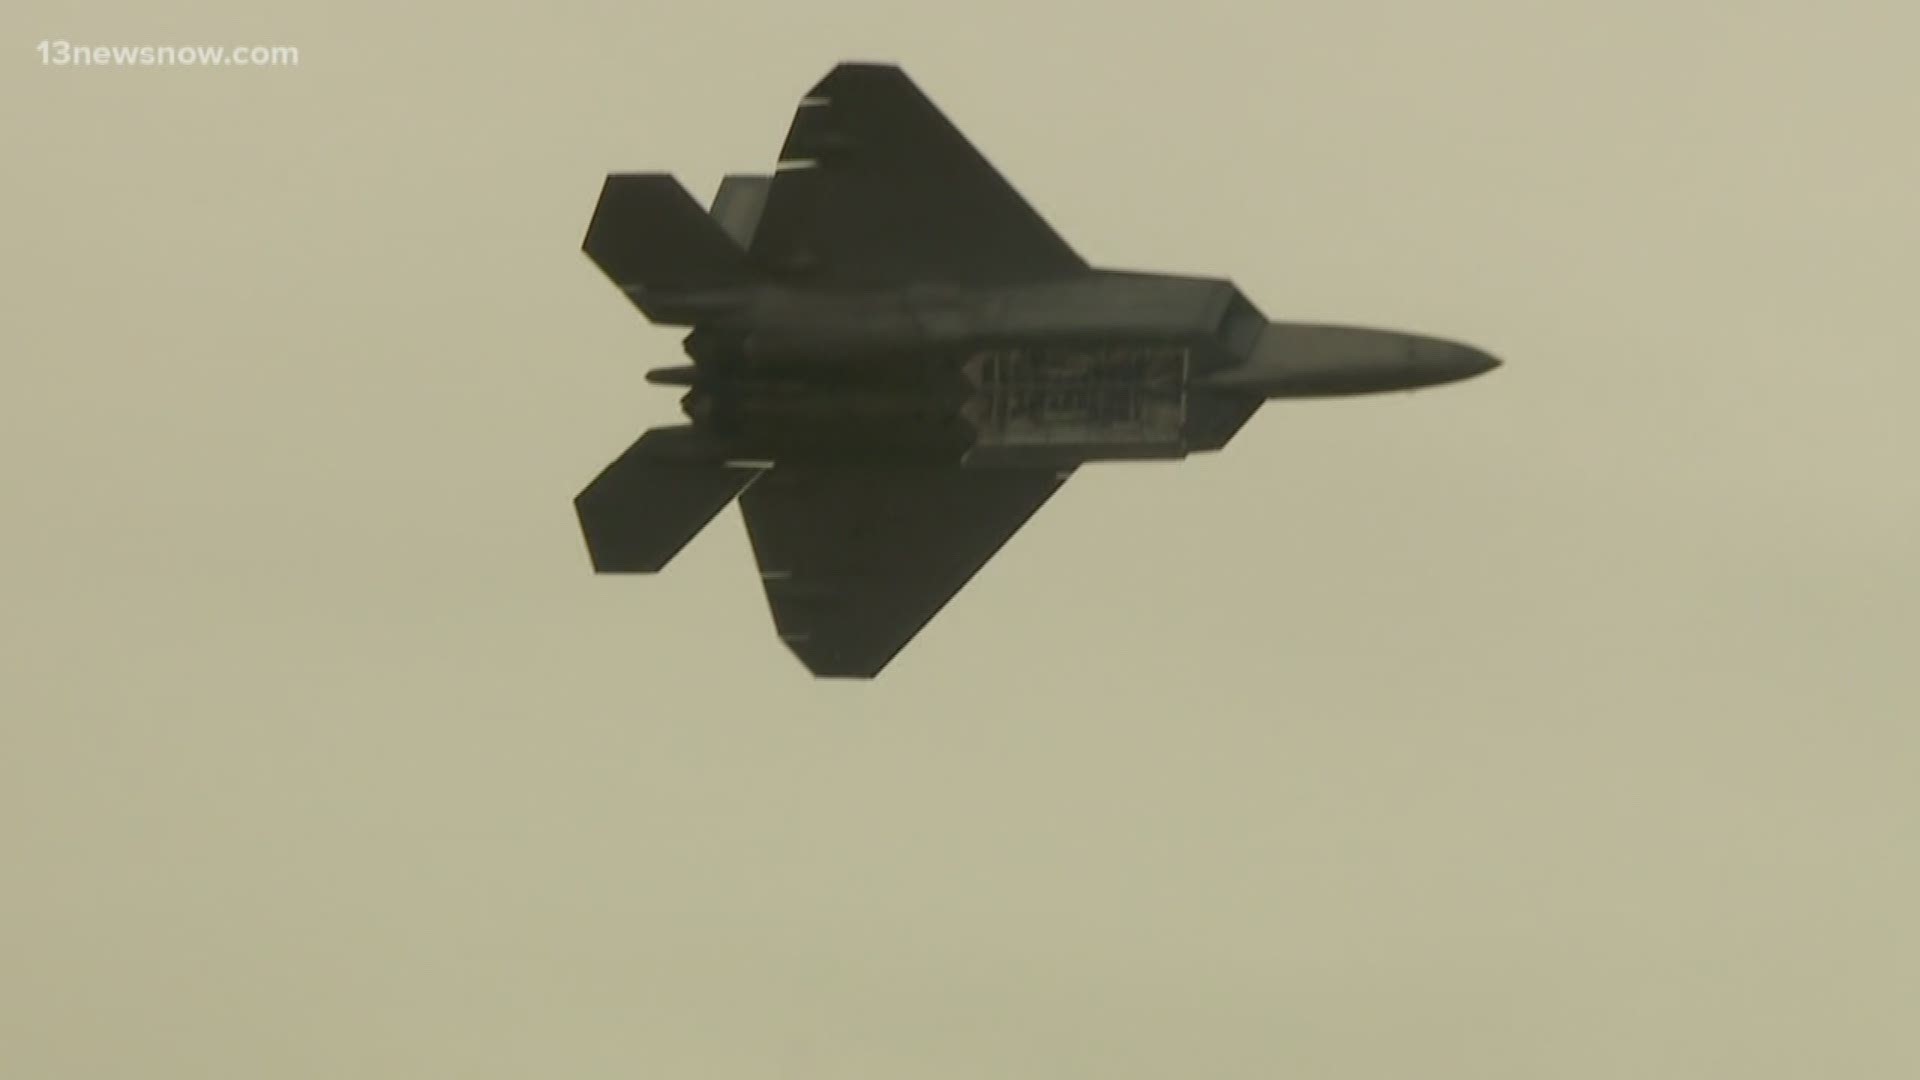 13News Now Mike Gooding has more details about the rough landing at Langley Air Force Base after an F-22 raptor had an issue with the landing gear. The pilot is okay